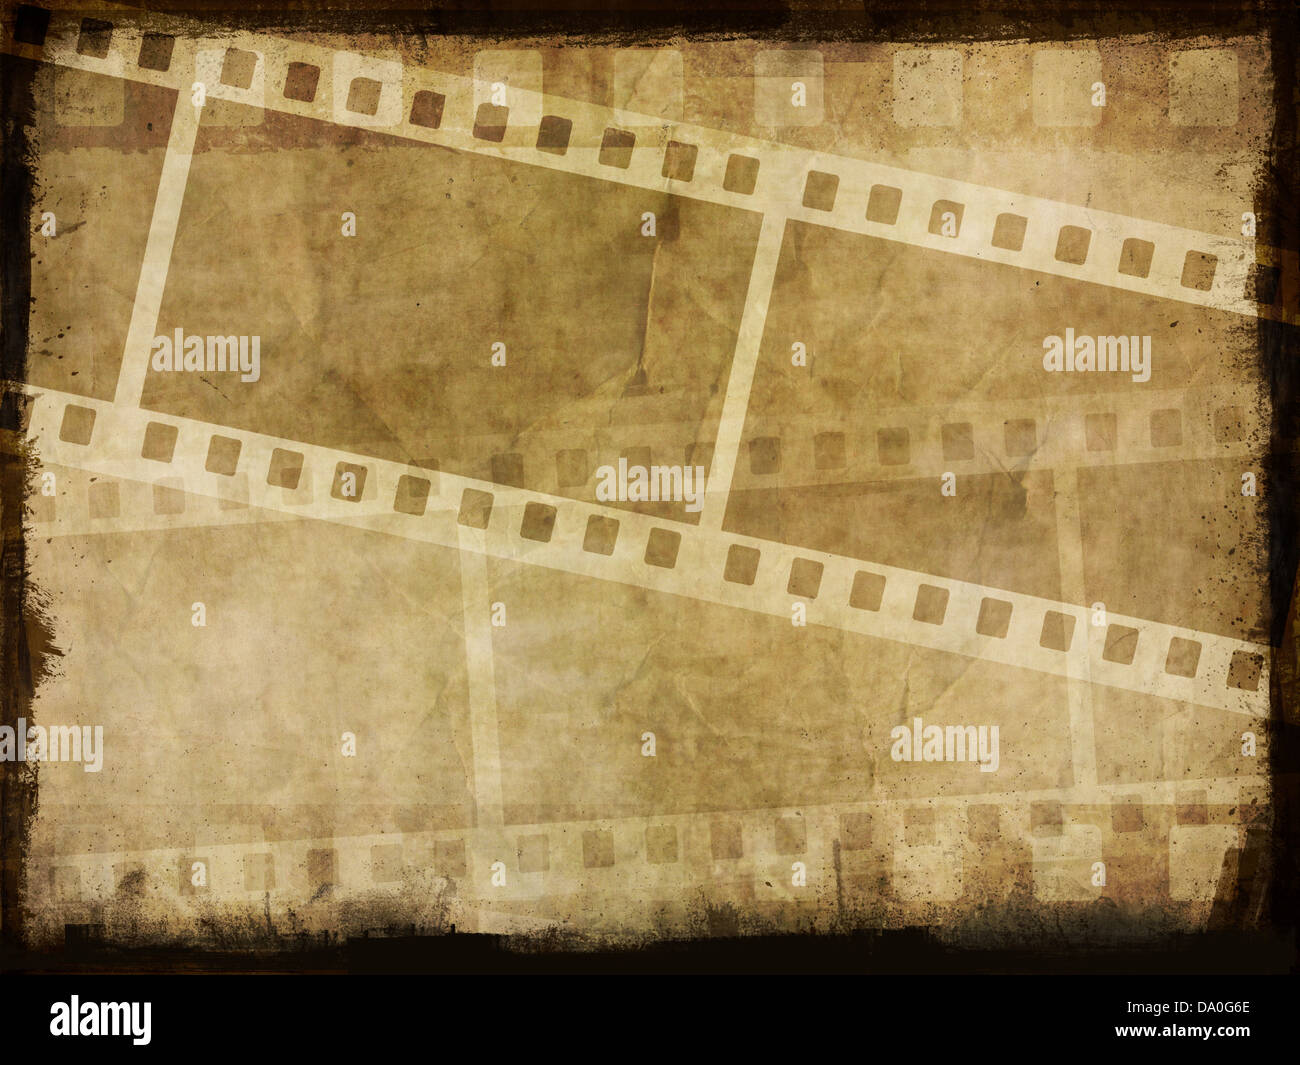 Dirty grunge background with image of film strips Stock Photo